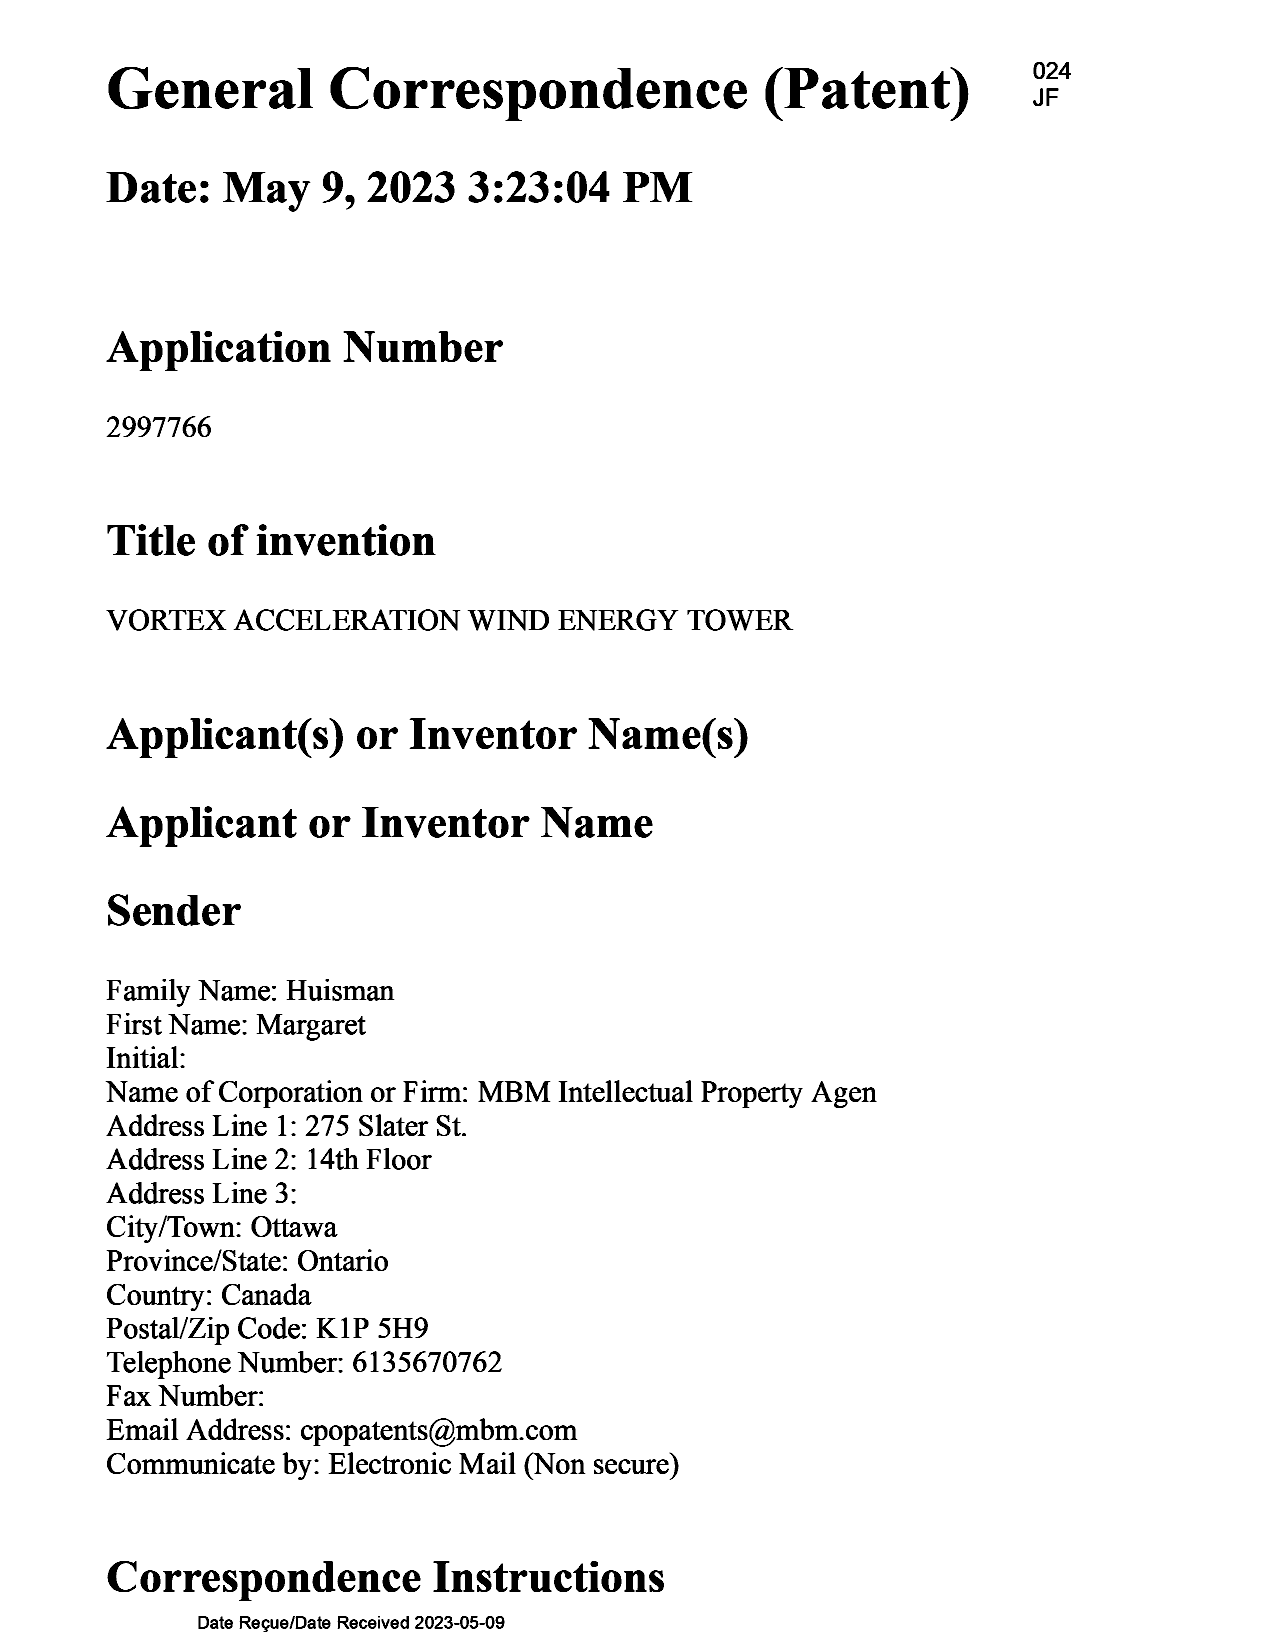 Canadian Patent Document 2997766. Change of Agent 20230509. Image 1 of 4